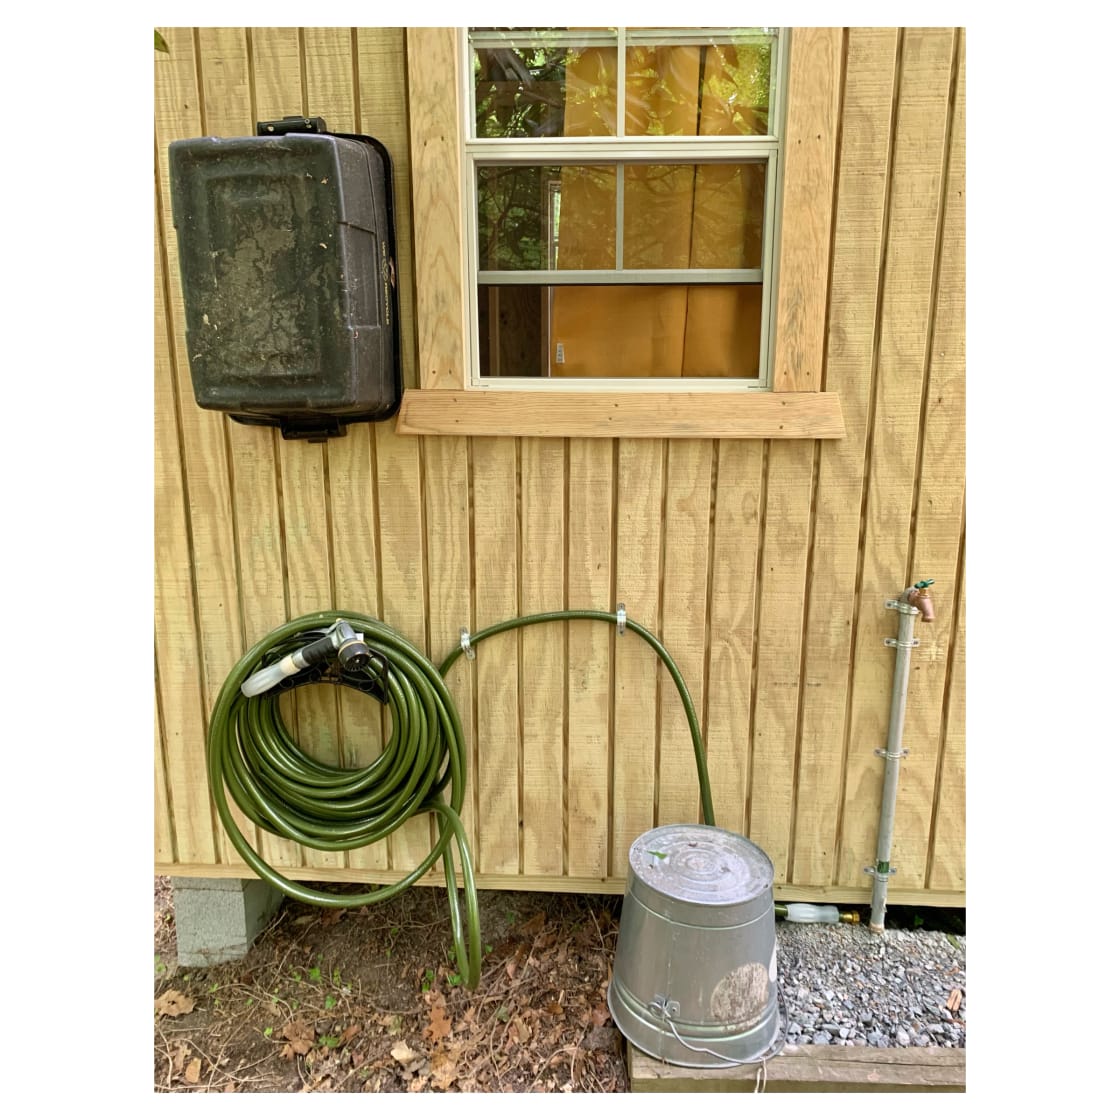 Spigot w/ potable water, a hose for rinsing off or putting fires out, and a wash bin is provided.